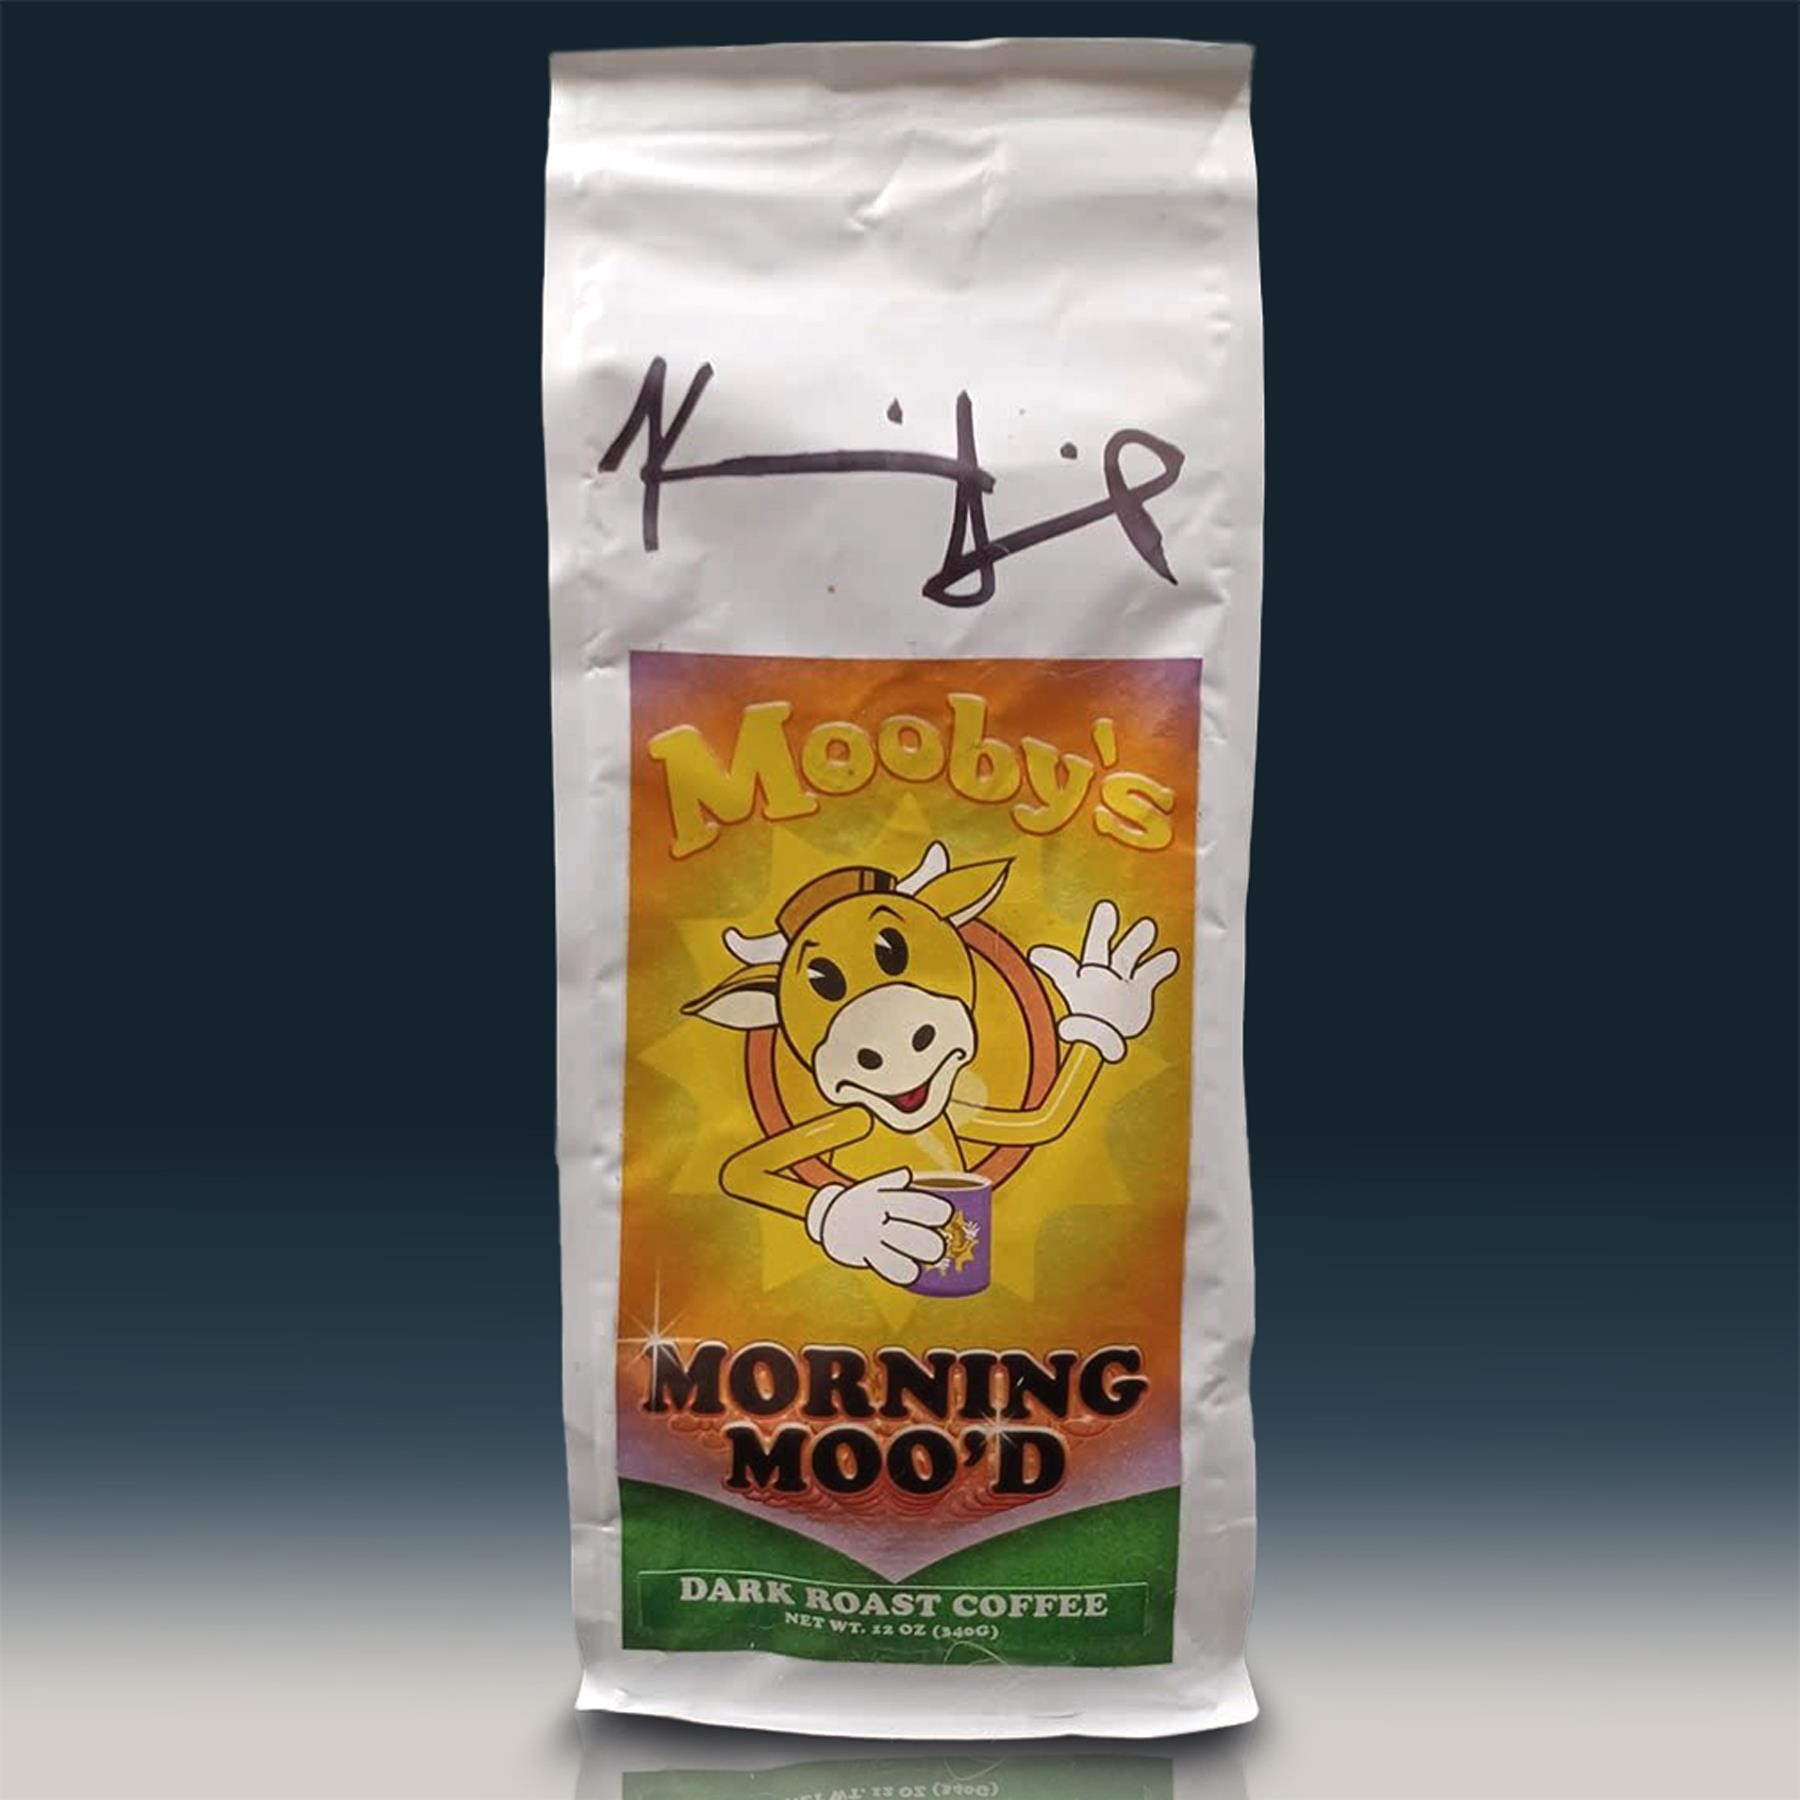 Mooby's Morning Moo'd Dark Coffee Sign Kevin Smith